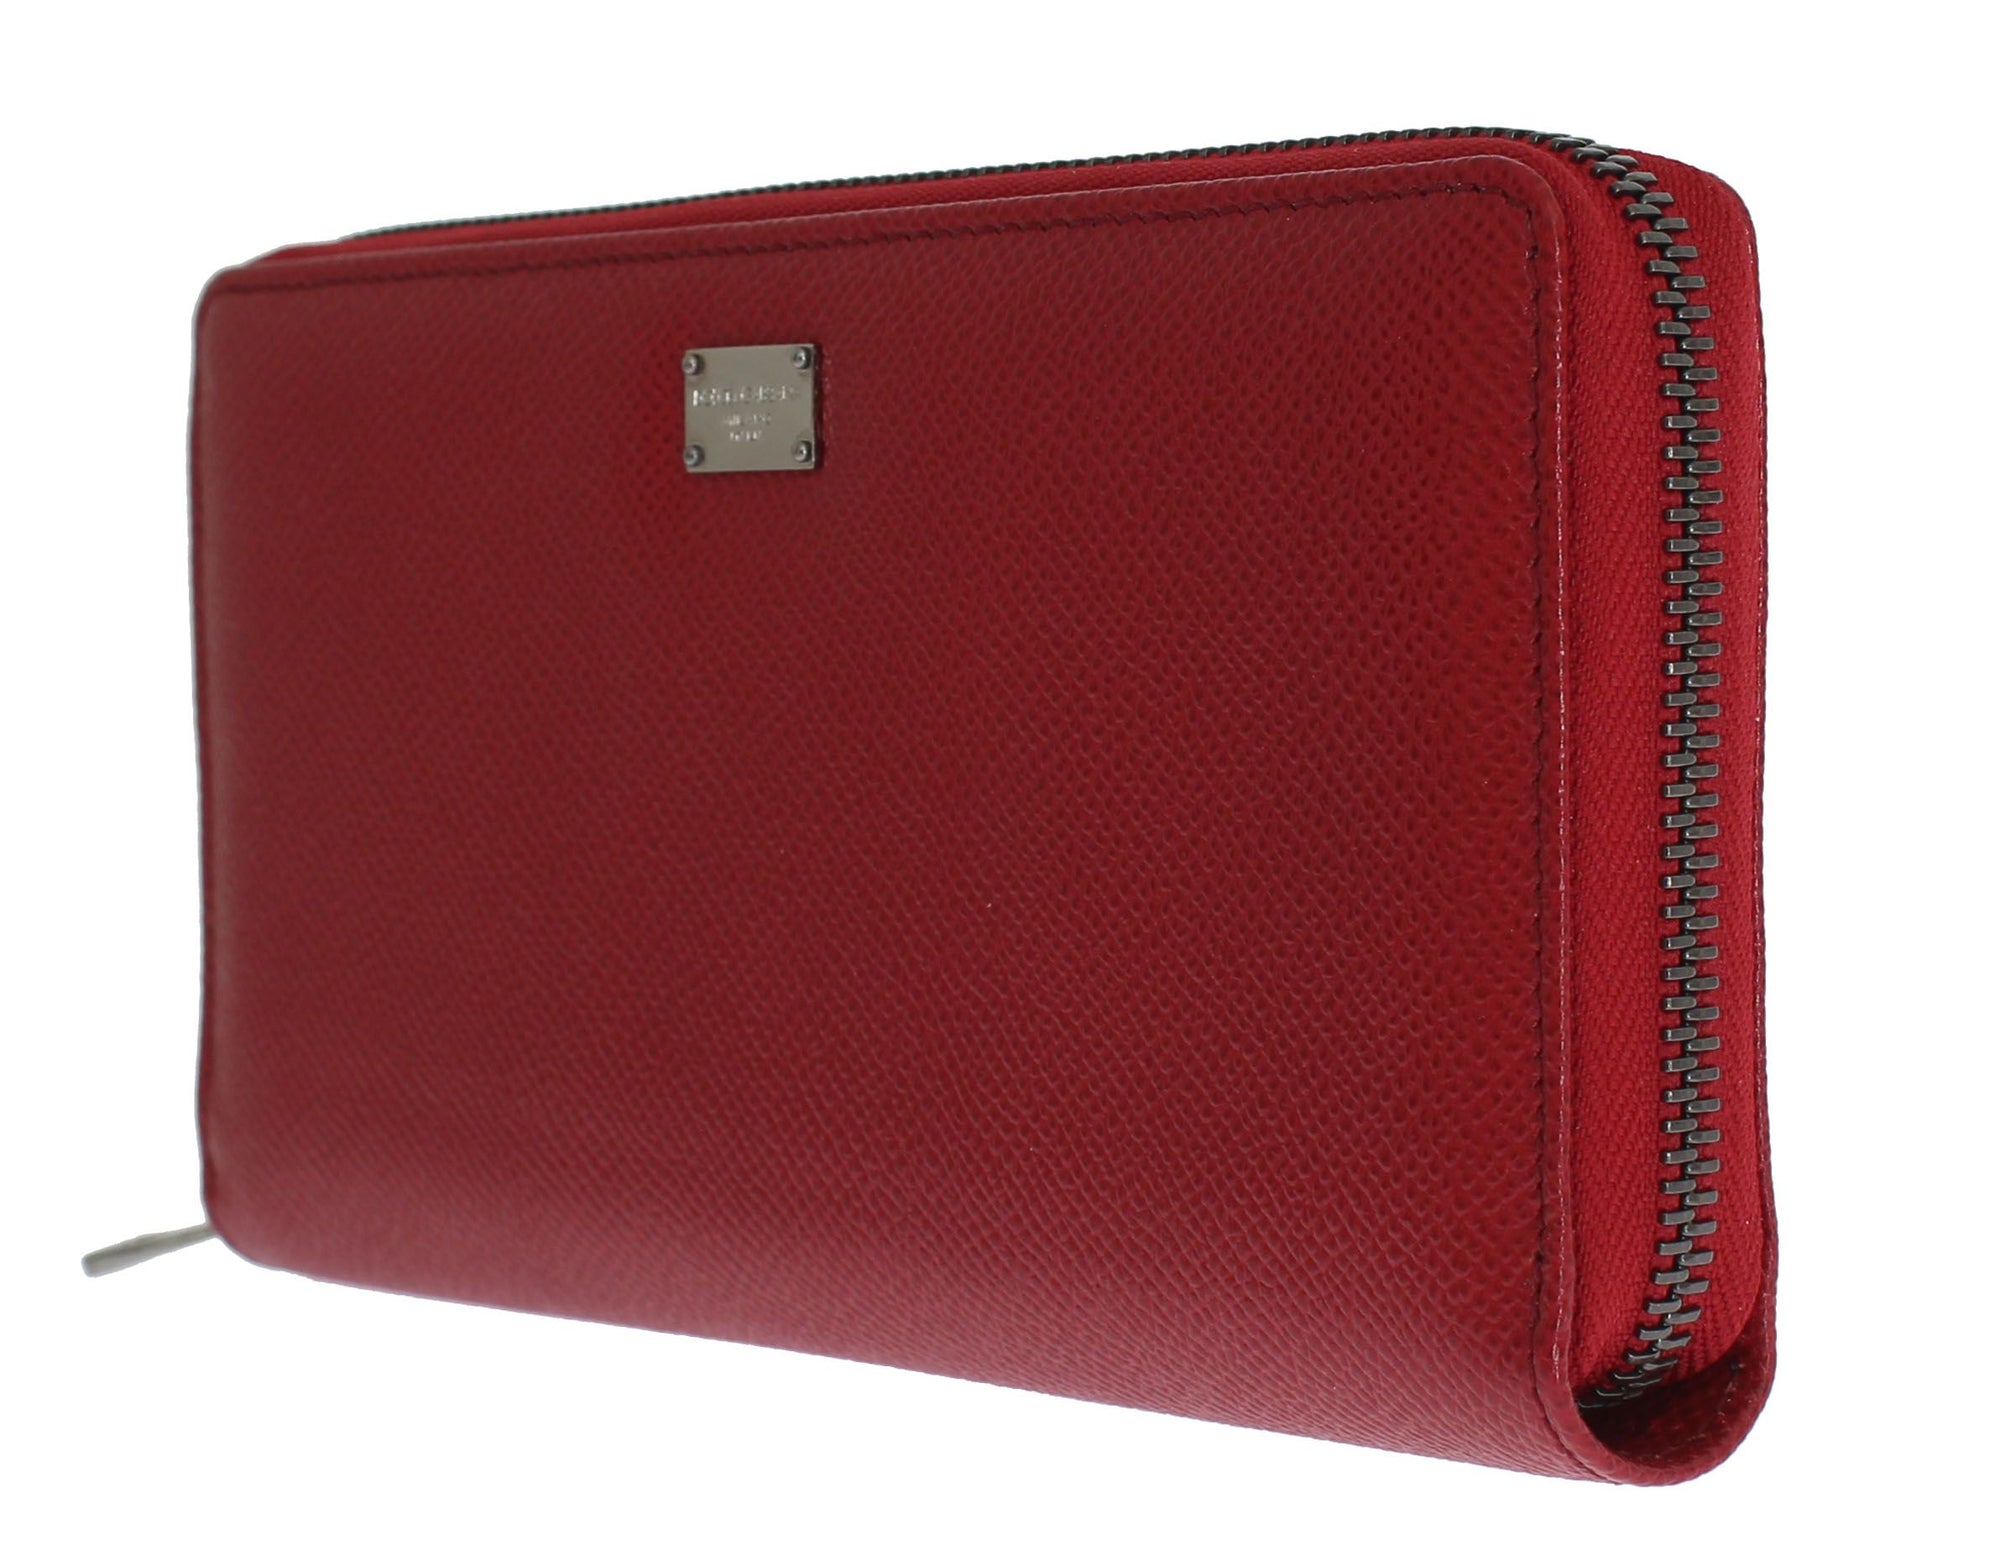 Elegant Red Leather Continental Wallet